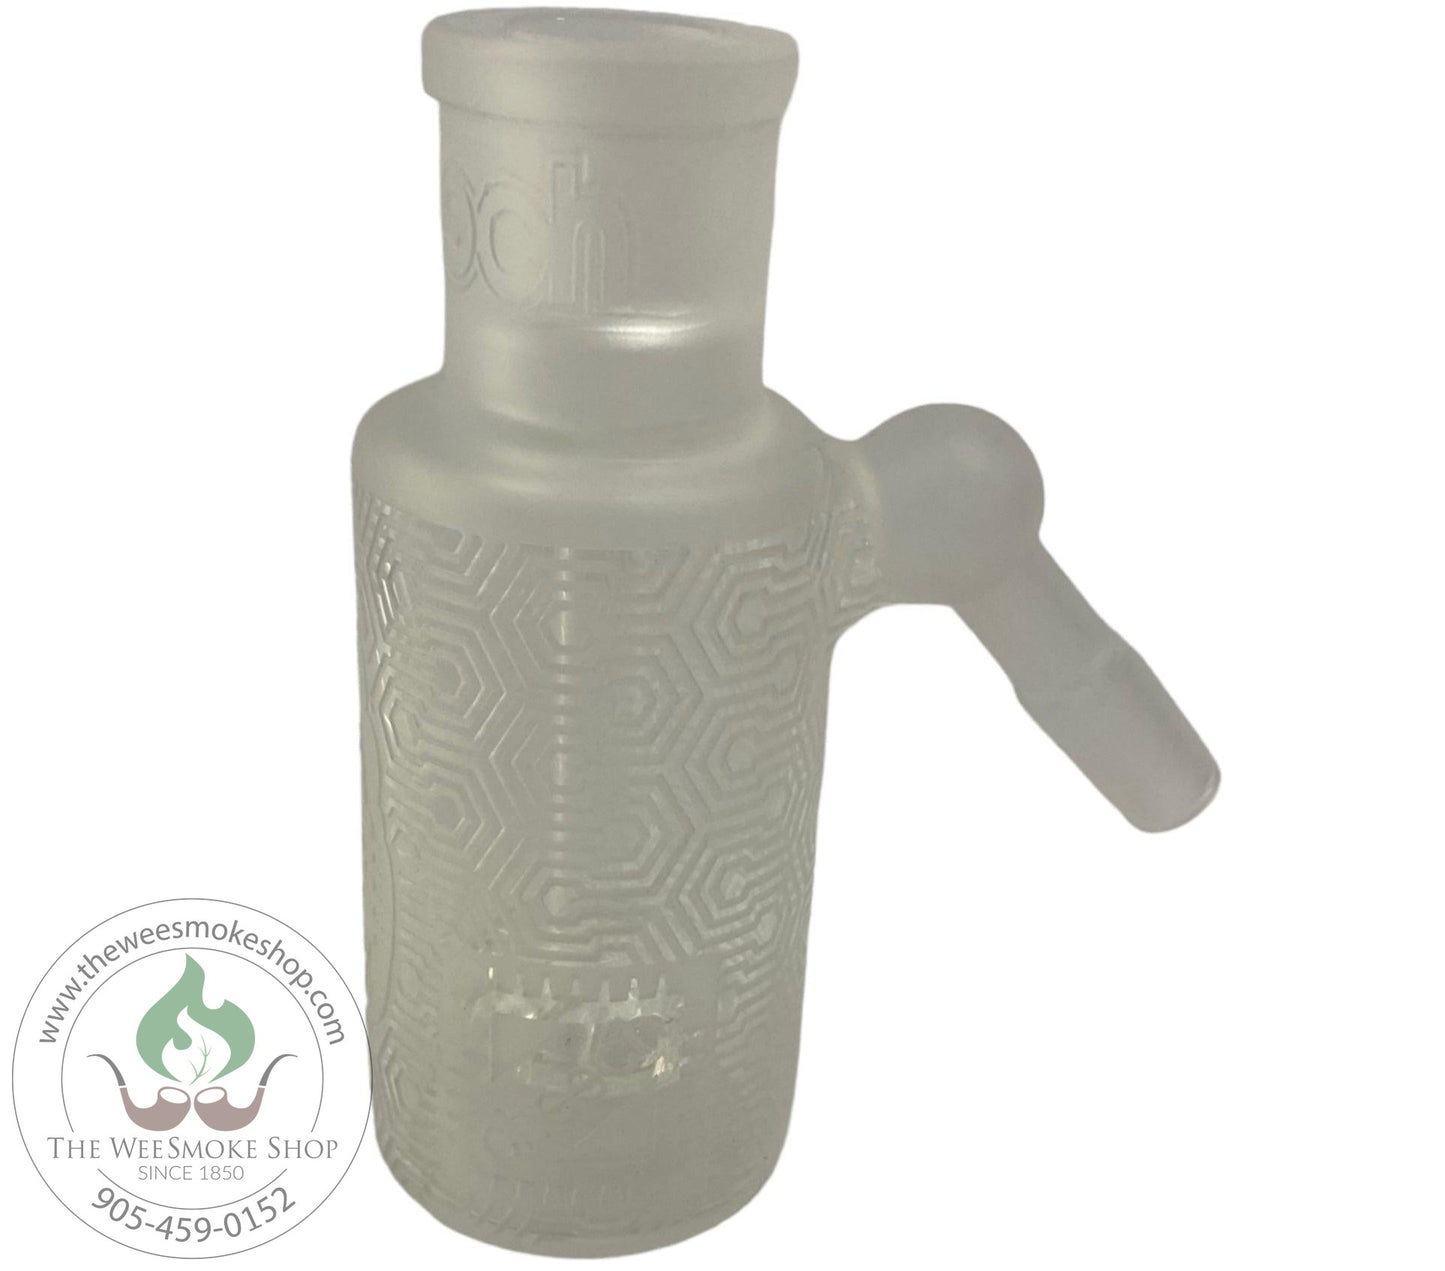 Cheech 18mm Frosted 45 Degree Ash Catcher-Ash Catchers-The Wee Smoke Shop